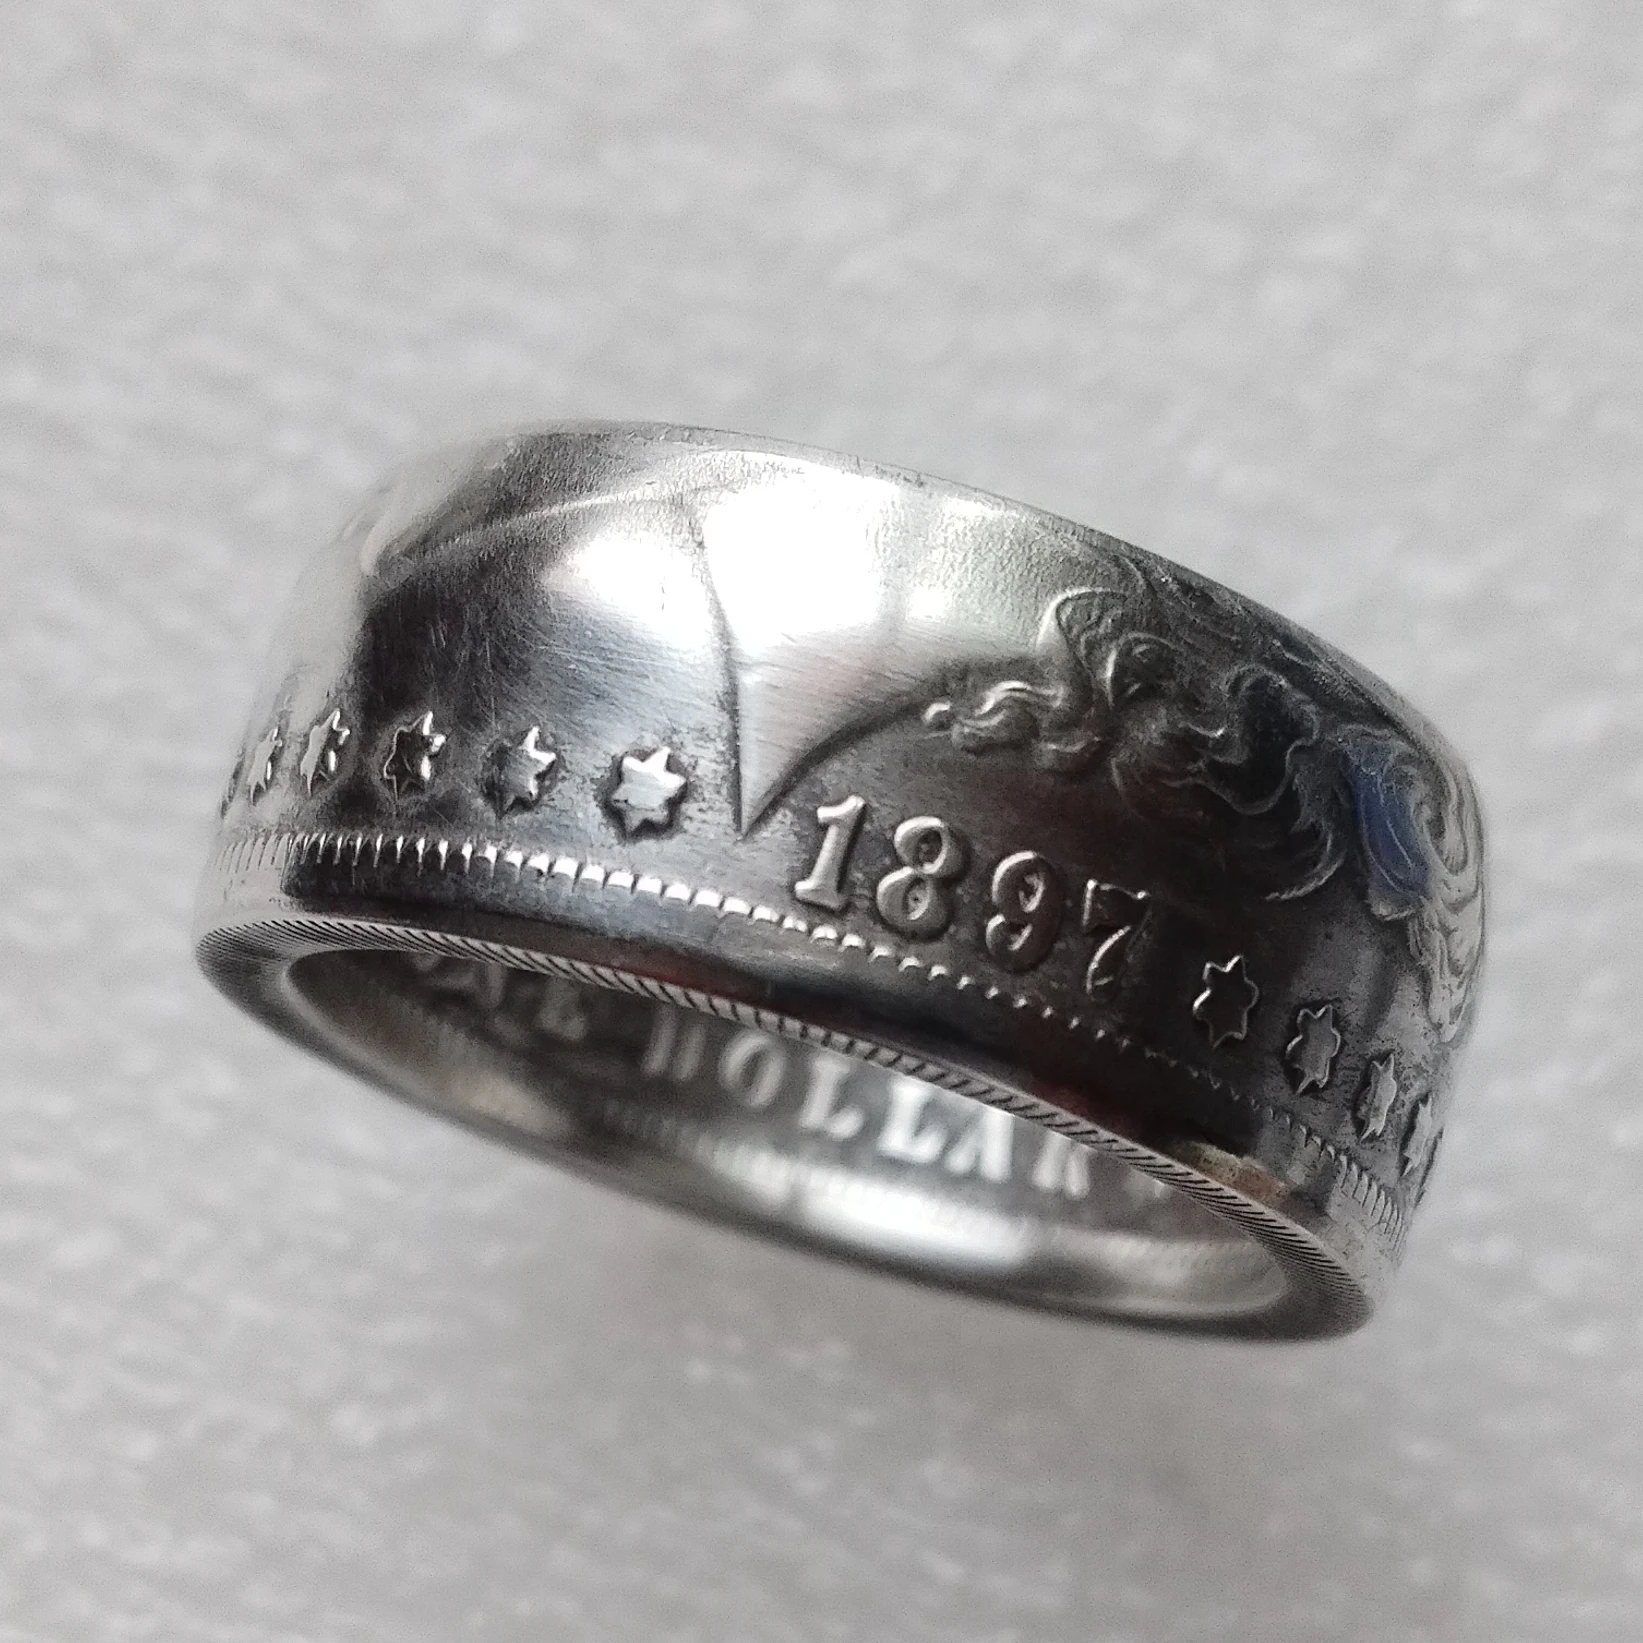 

Vintage Handcrafted Coin Ring from Morgan Dollar 1897 Silver Plated Women Men Creative Personalized Souvenir Jewelry